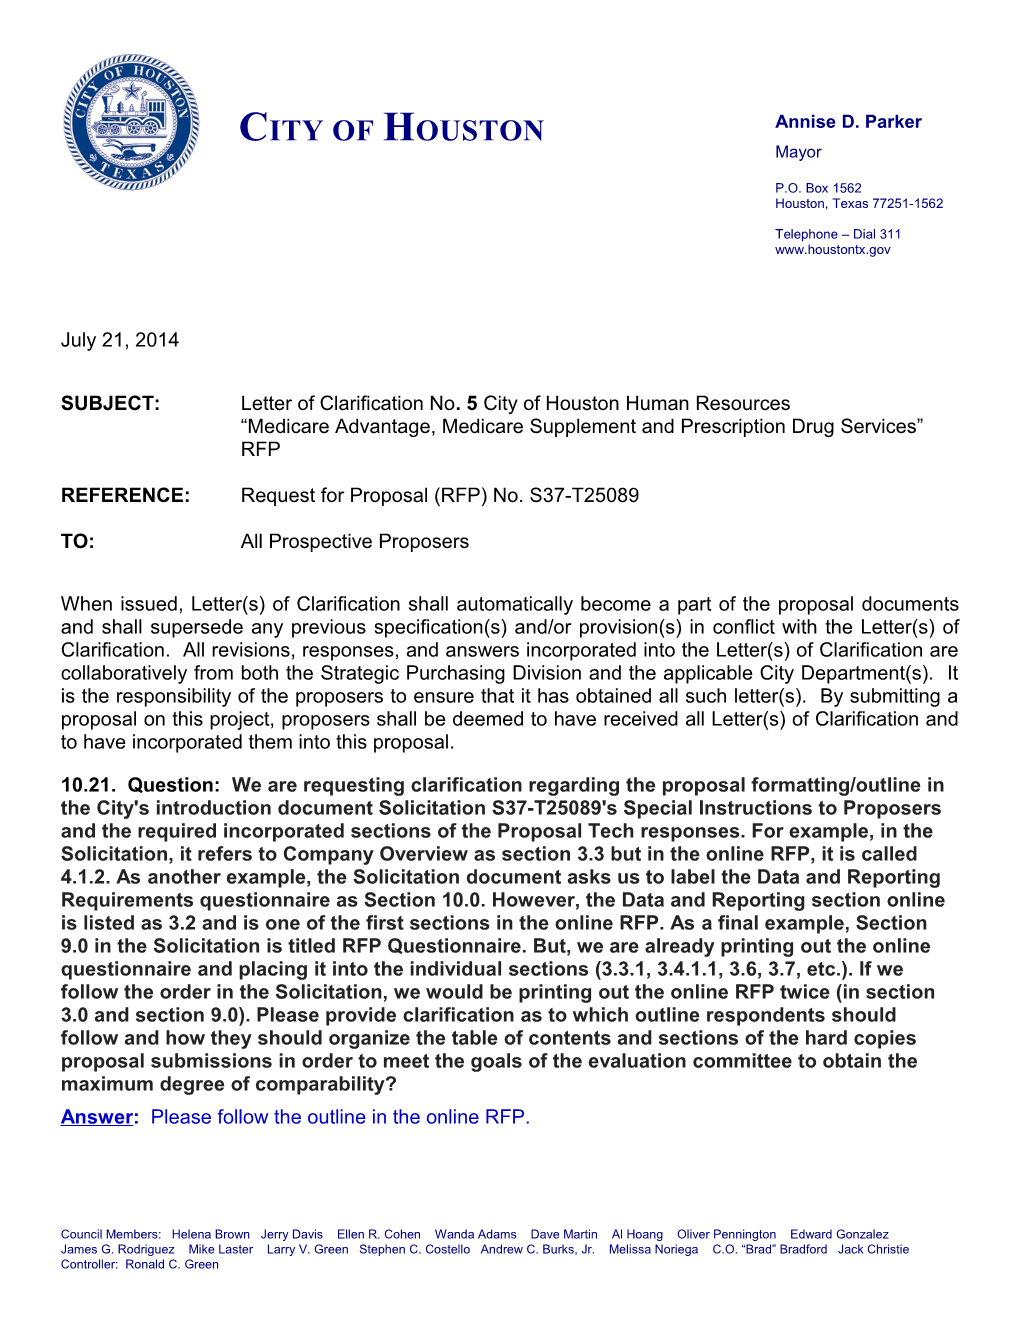 SUBJECT:Letter of Clarification No. 5 City of Houston Human Resources